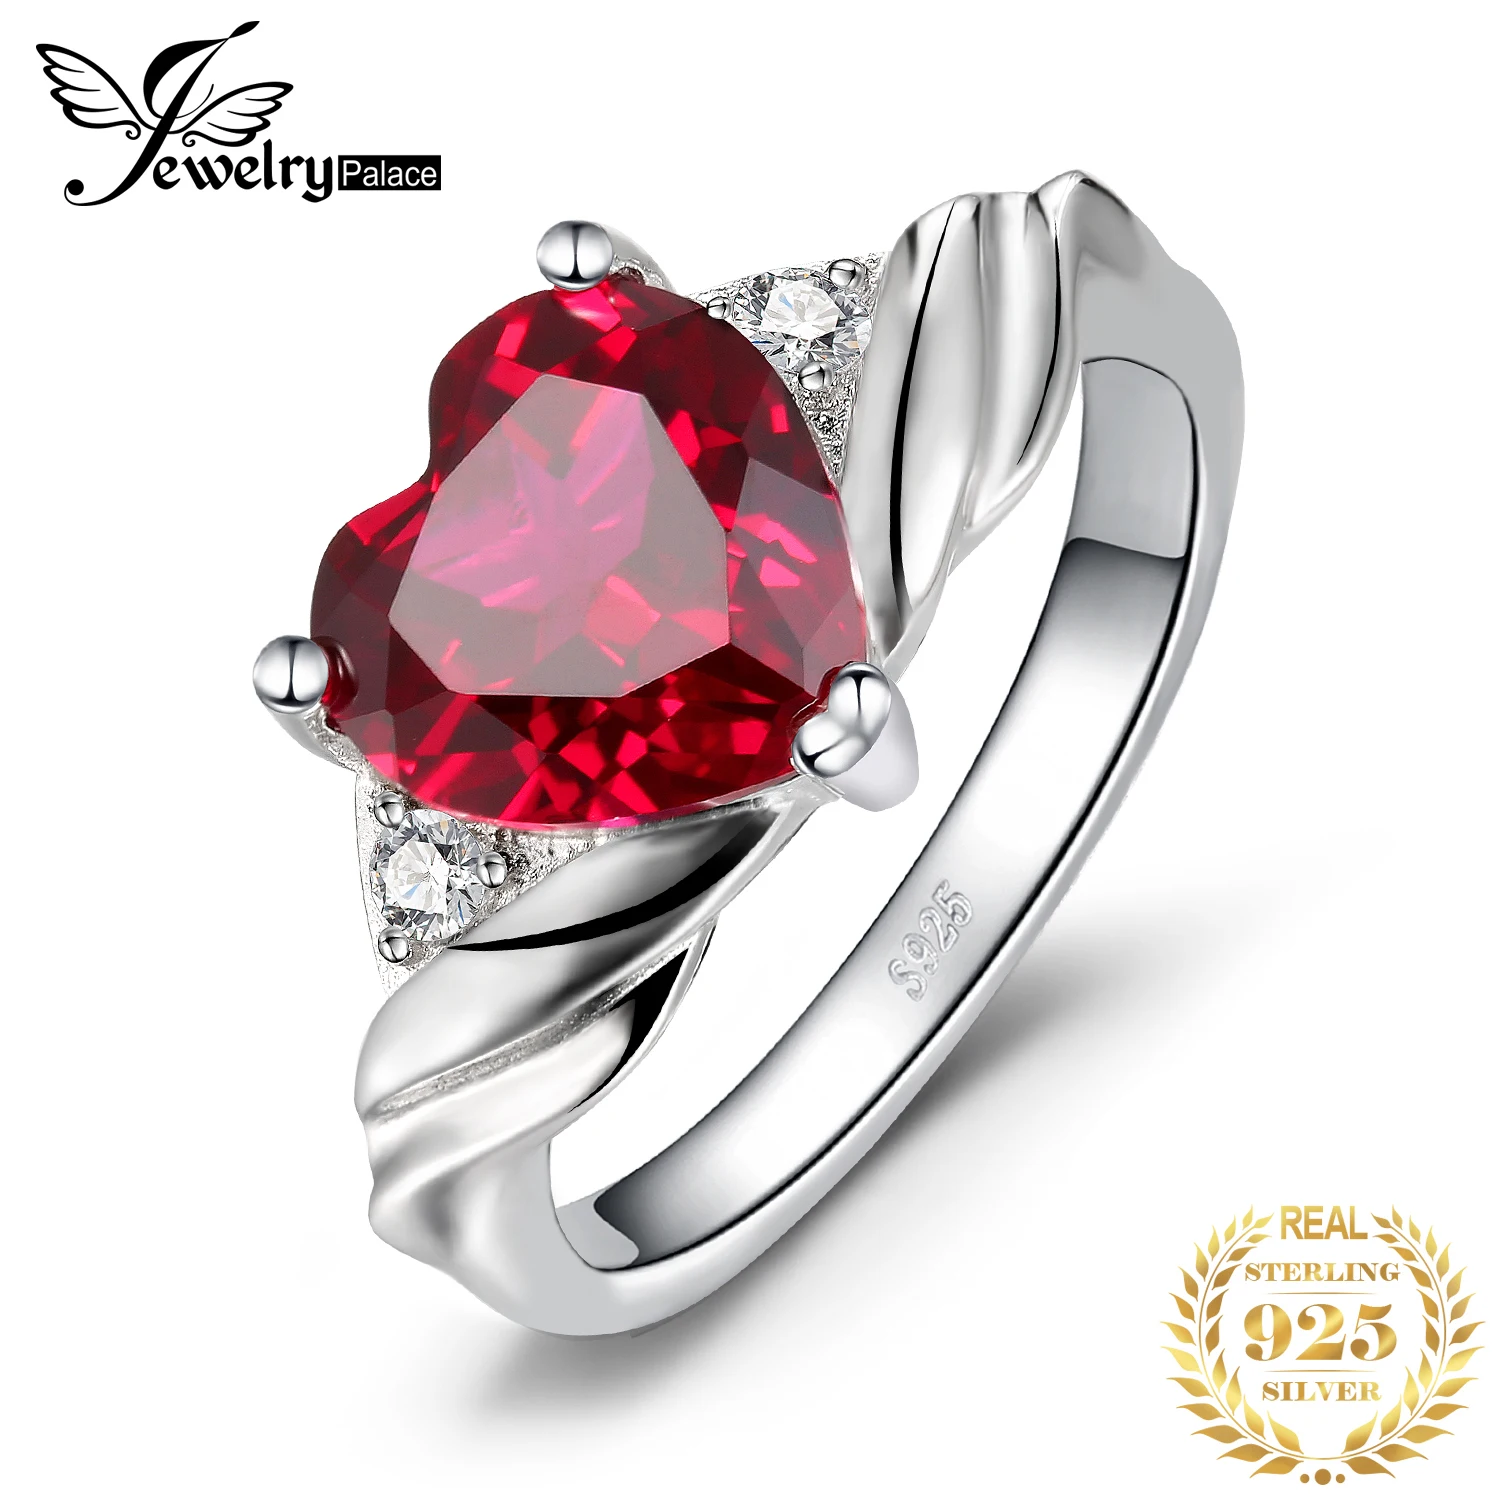 

JewelryPalace Love Heart 3.6ct Created Ruby 3 Stone 925 Sterling Silver Ring for Woman Fashion Trendy Gemstone Gift Fine Jewelry